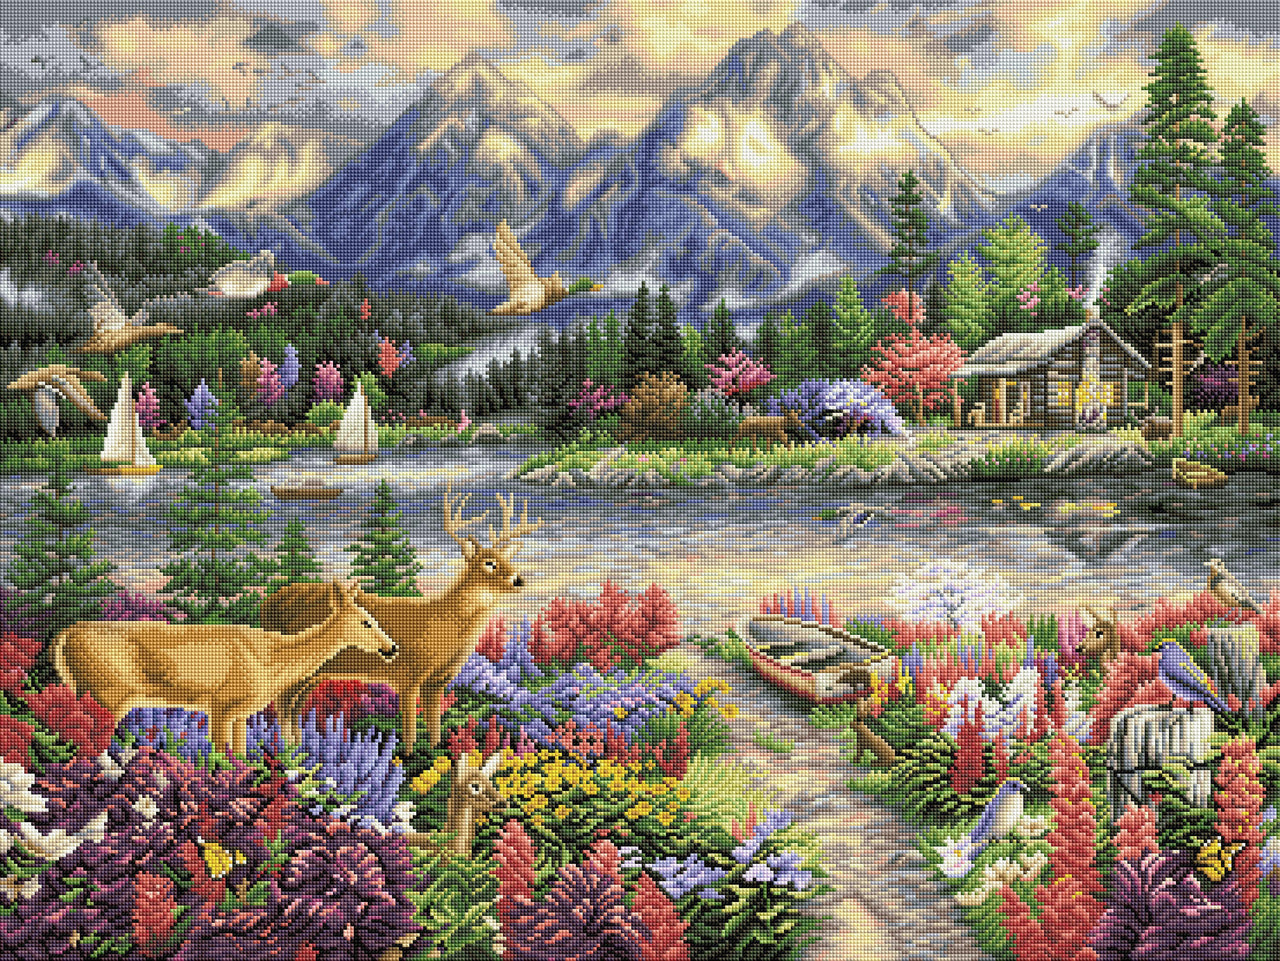 Diamond Painting Spring Mountain Majesty 36.6" x 27.6" (93cm x 70cm) / Square With 64 Colors Including 5 ABs / 102,213